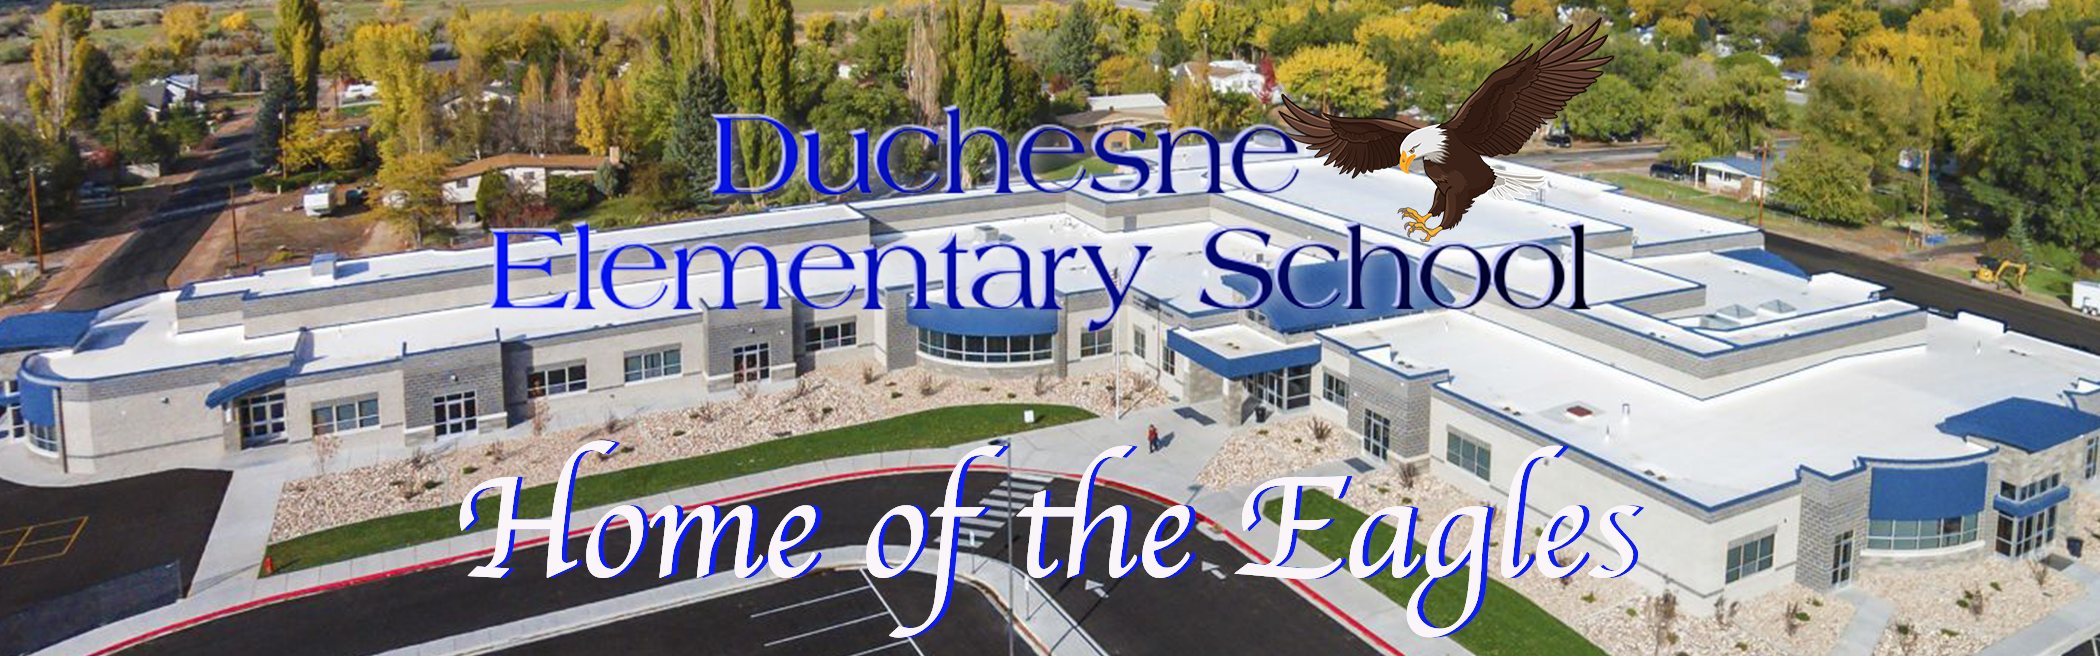 Duchesne Elementary arial of school and logo in front of picture